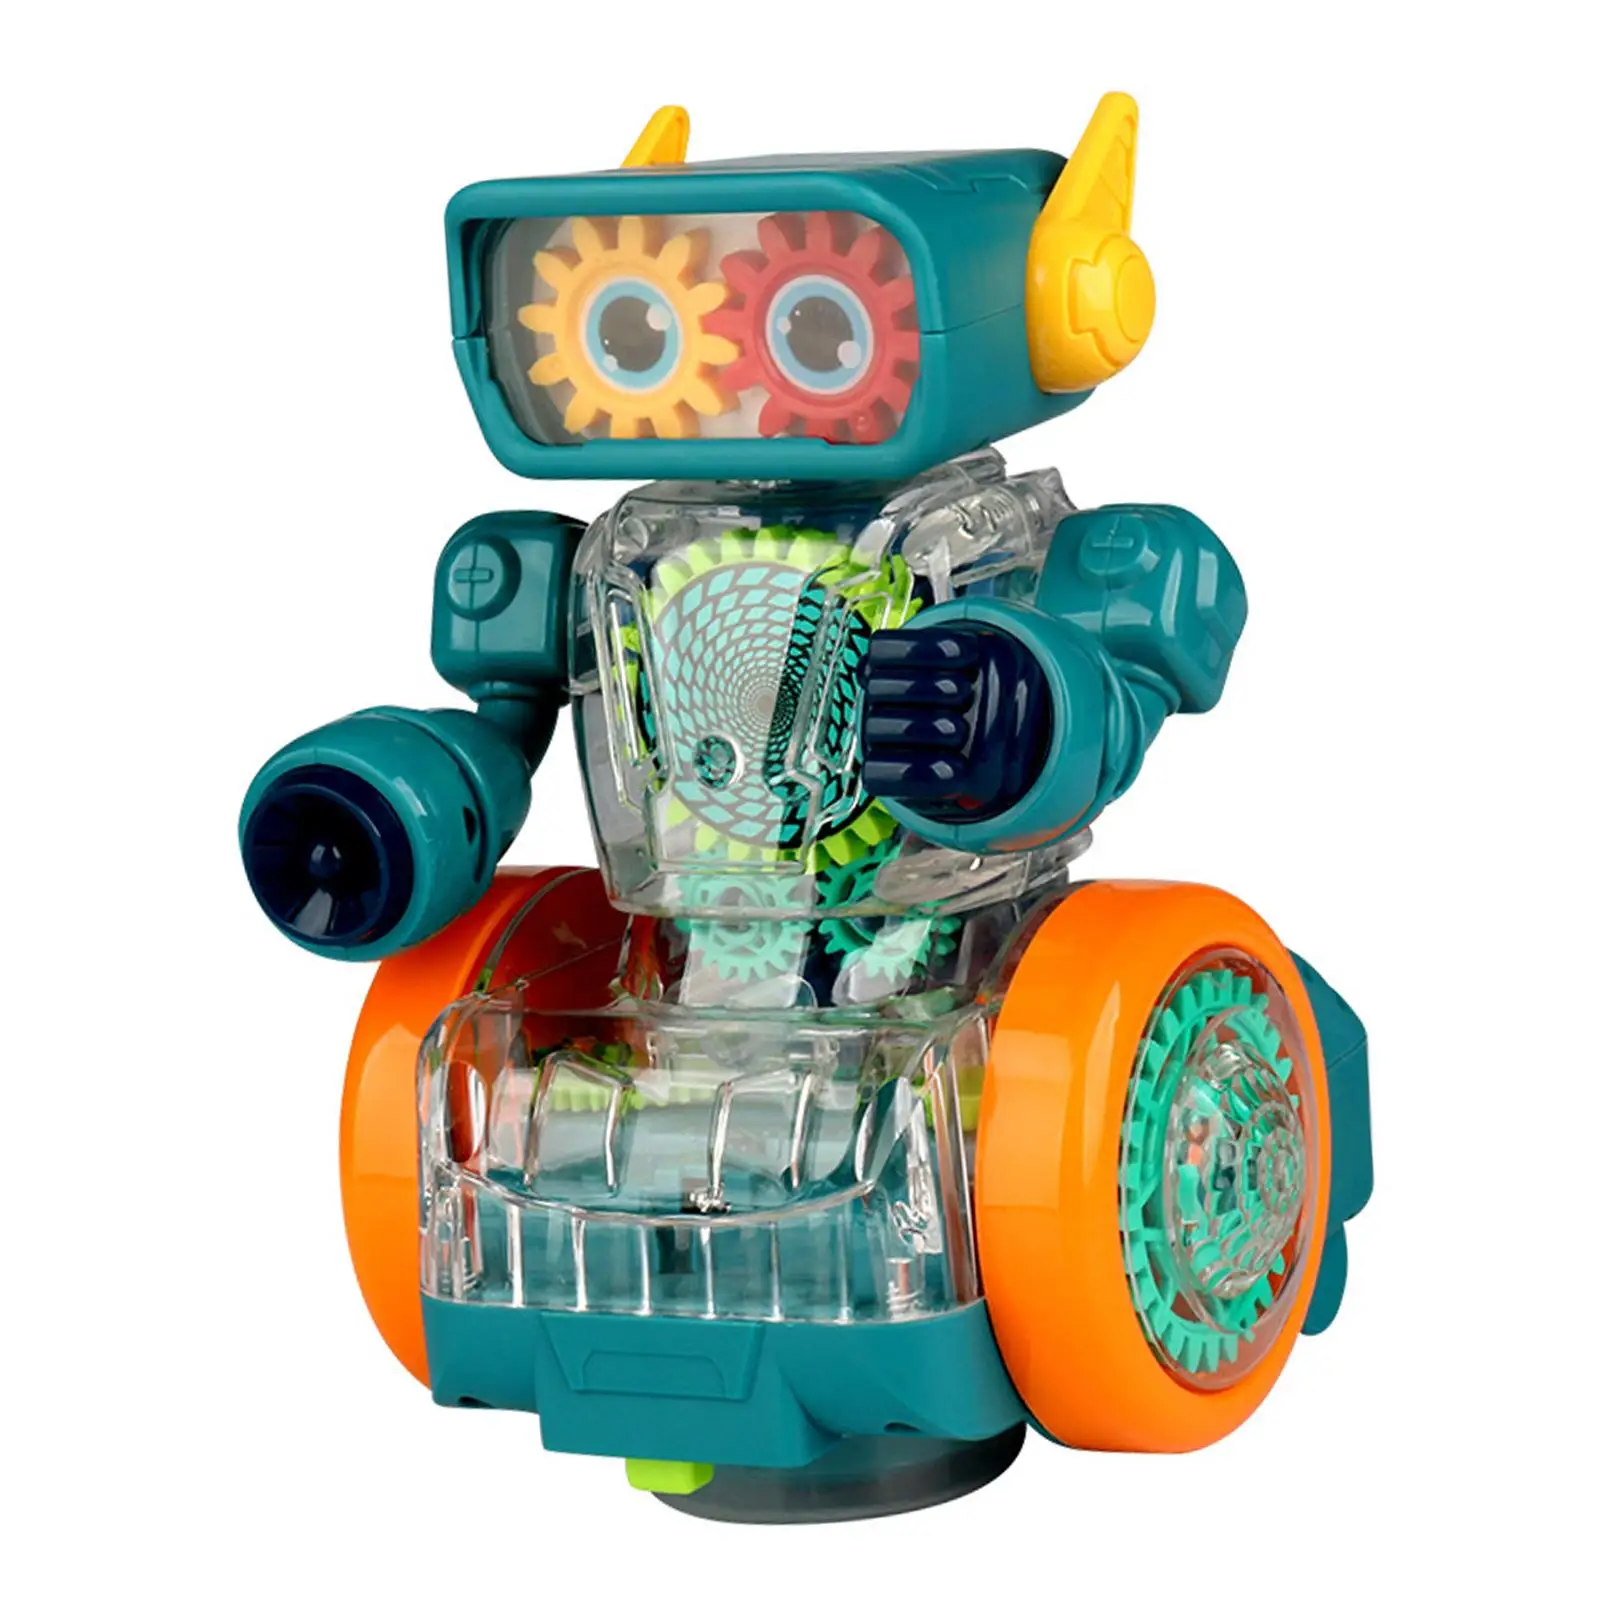 Electric Mechanical Gear Robot Toy with Moving Gears with Music Early Educational Toys for Toddlers Boys Children Kids Gifts